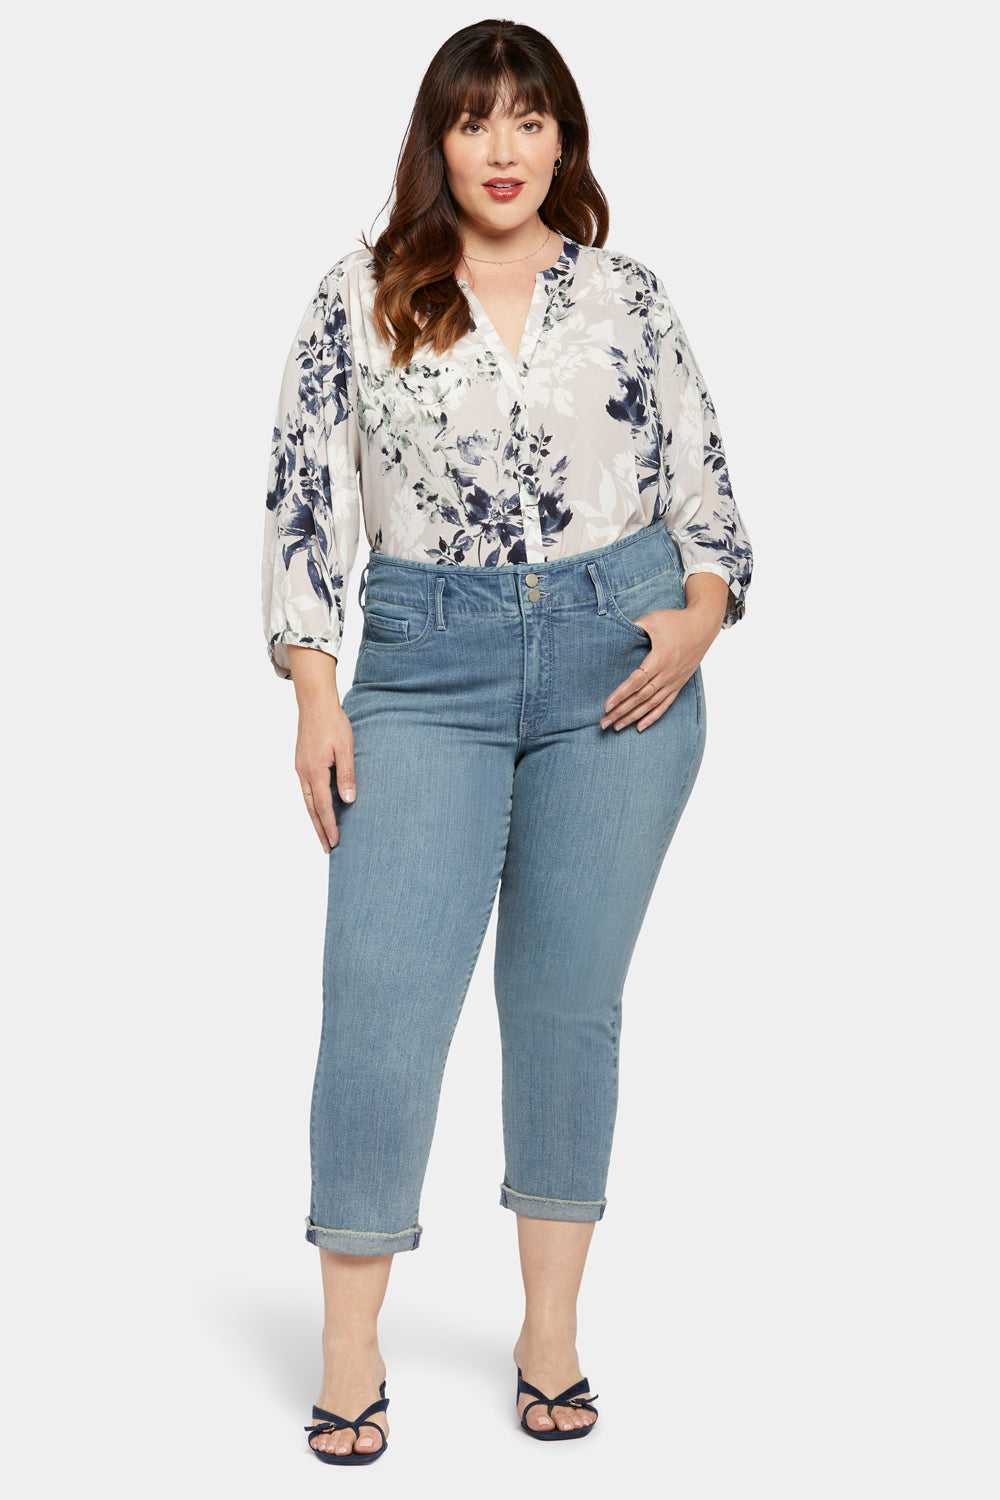 NYDJ Chloe Capri Jeans In Plus Size With Cuffs - Thistle Falls